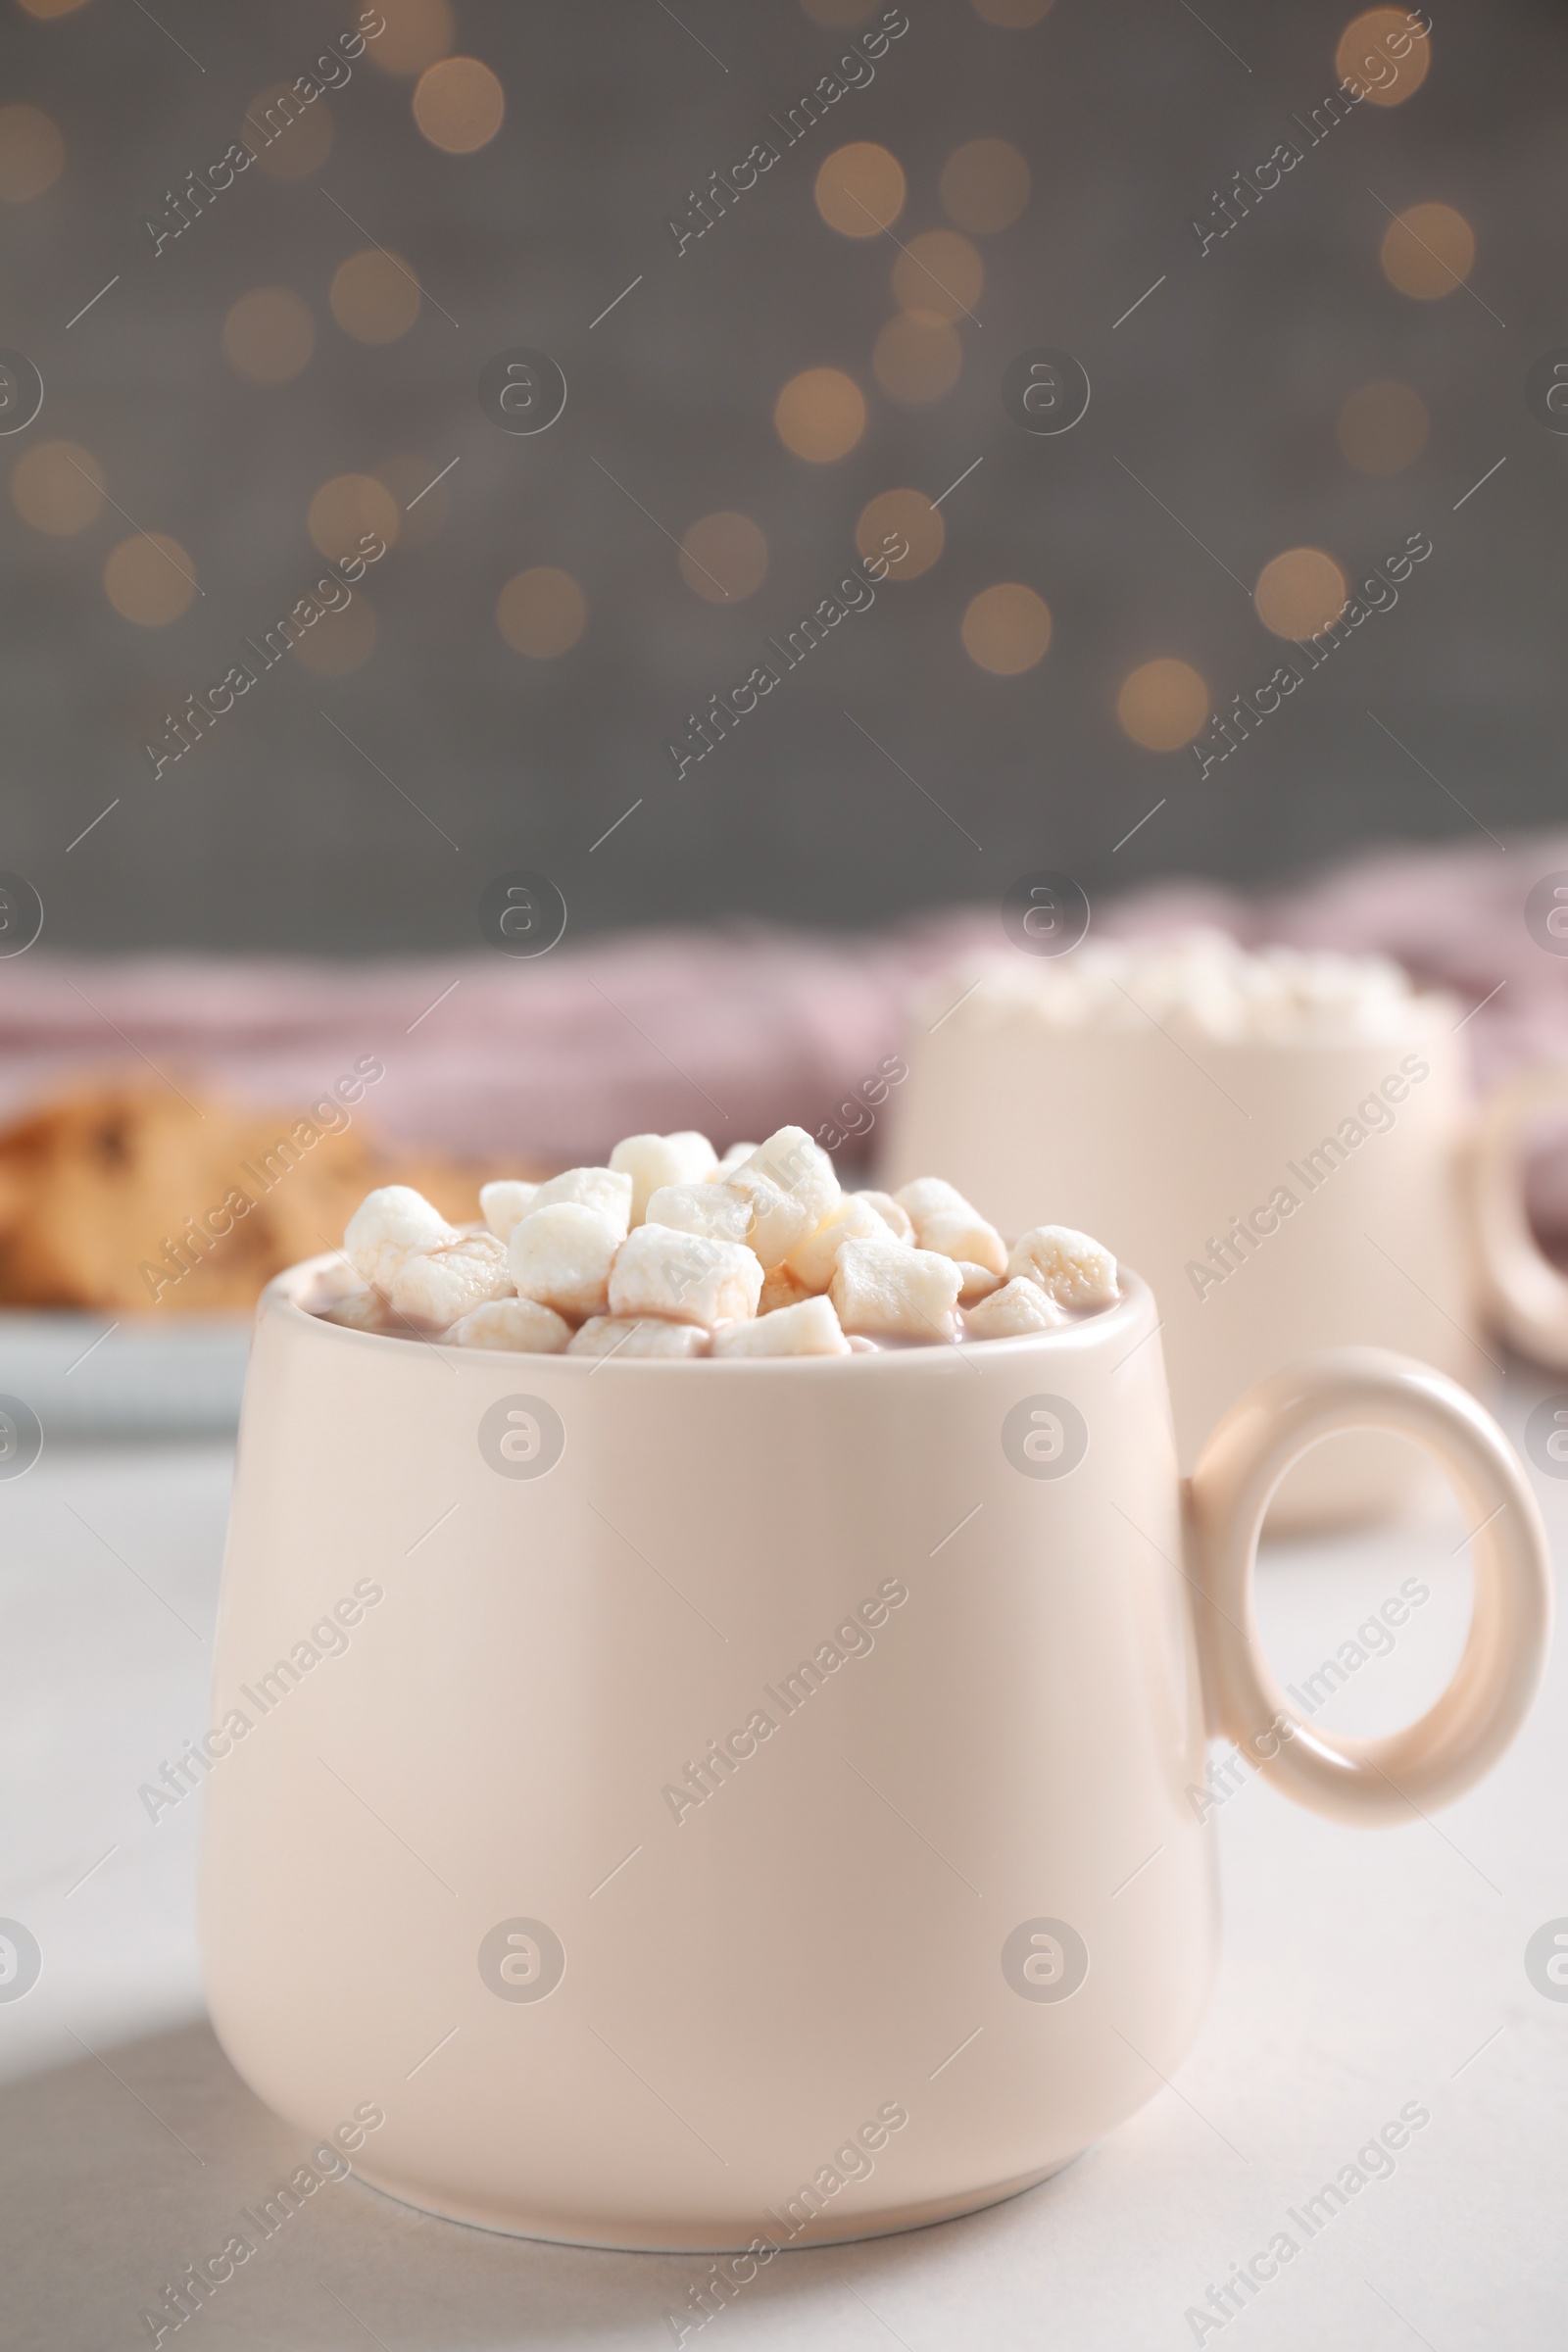 Photo of Cup of delicious hot cocoa with marshmallows on white table against blurred lights